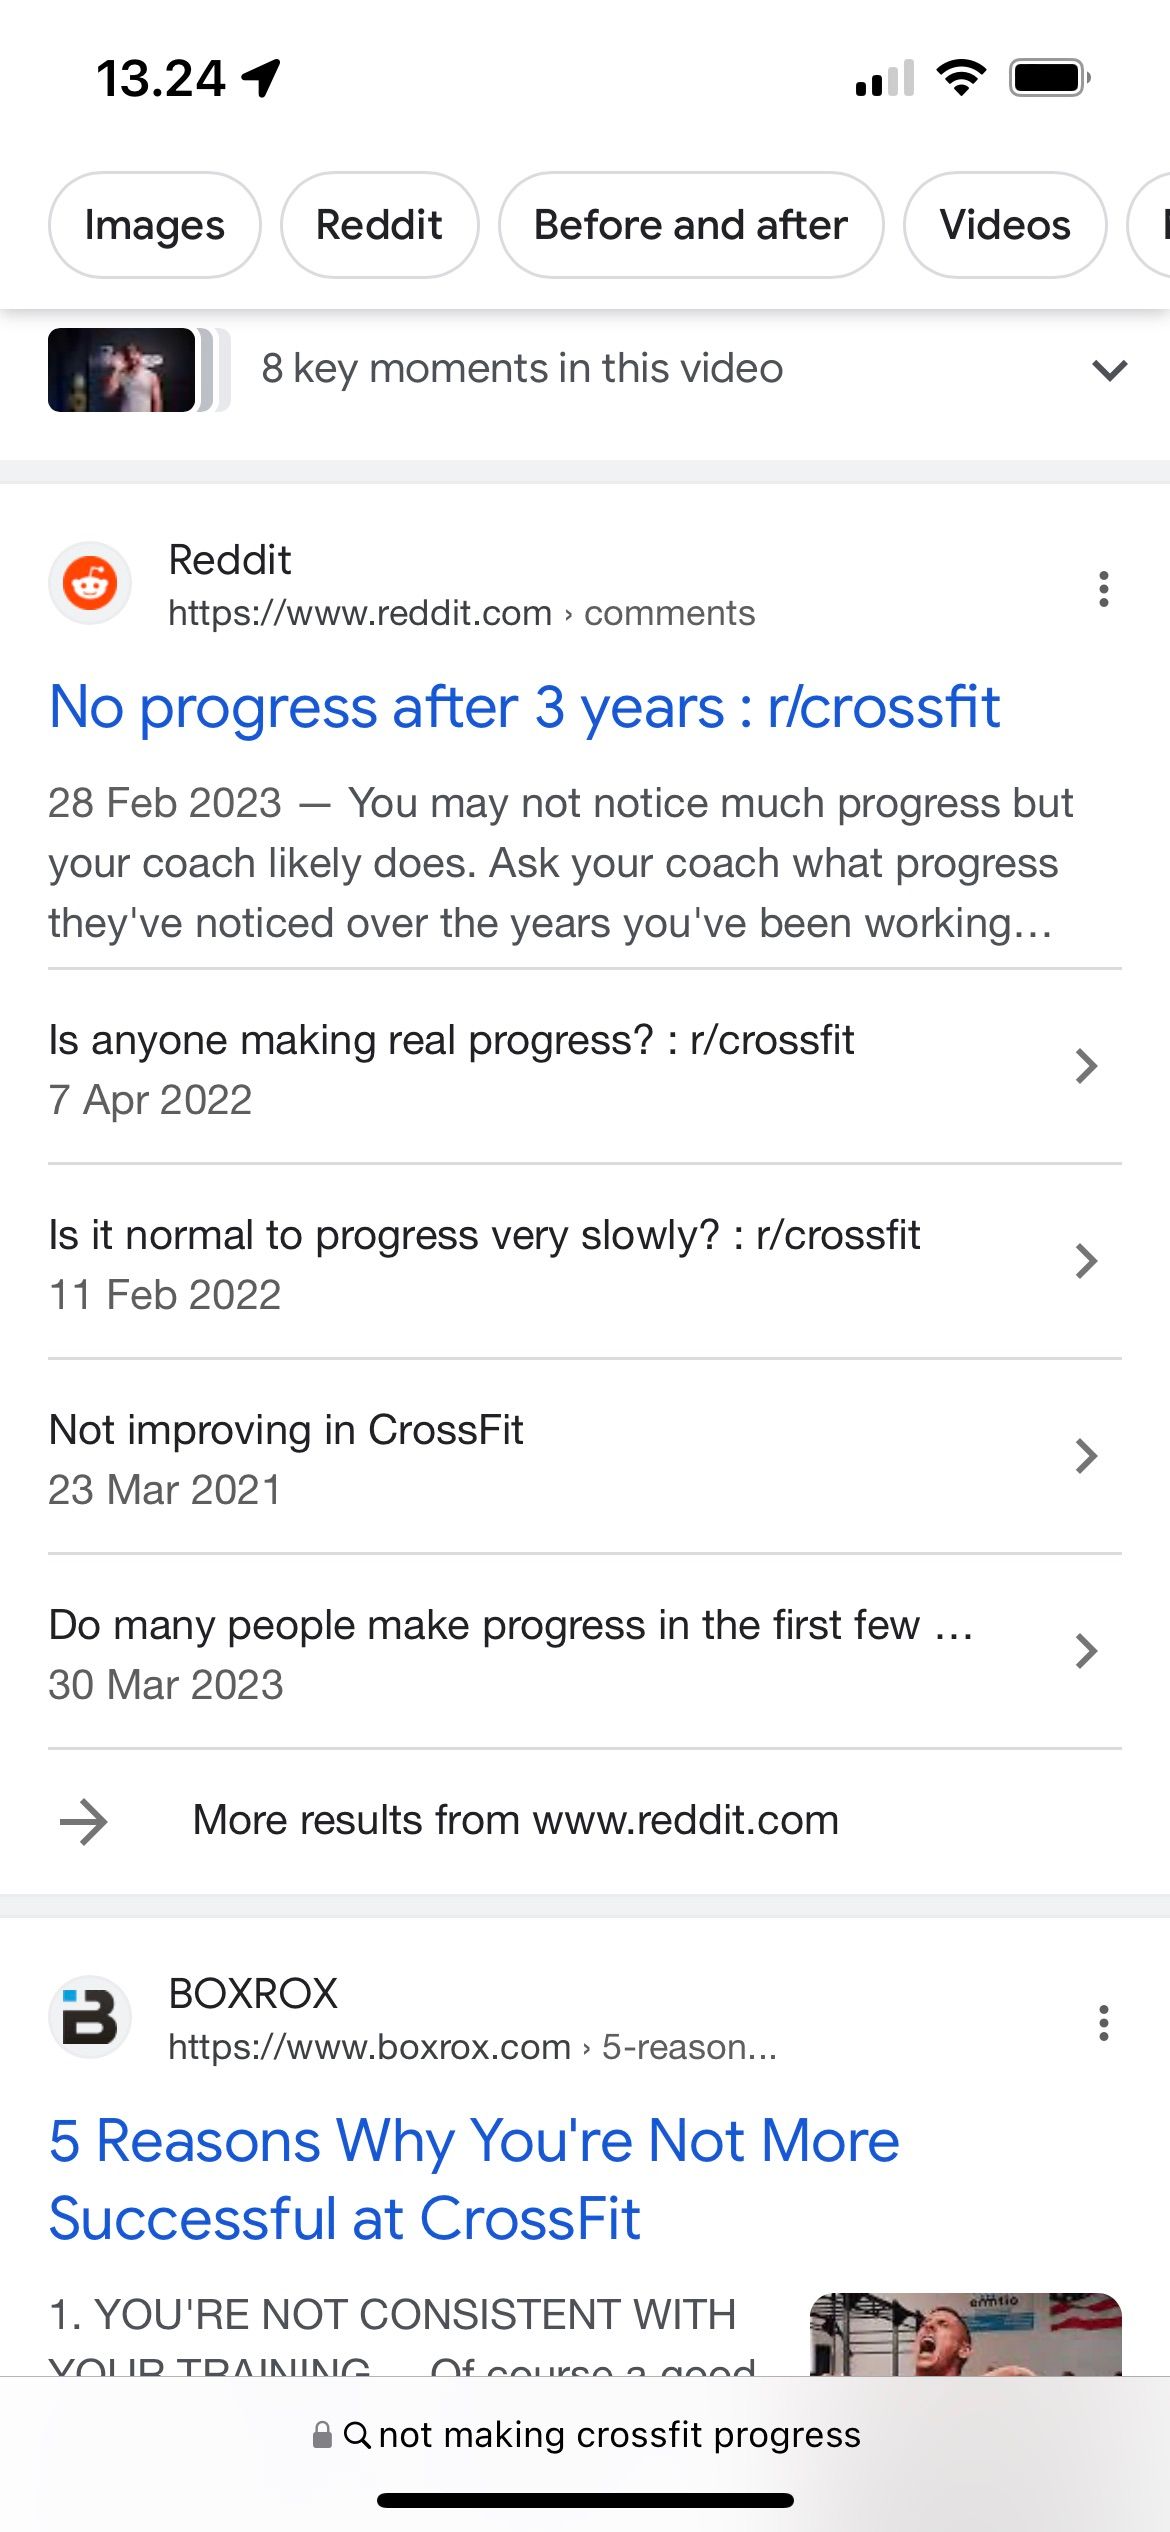 "More from reddit.com" appearing in a Google search